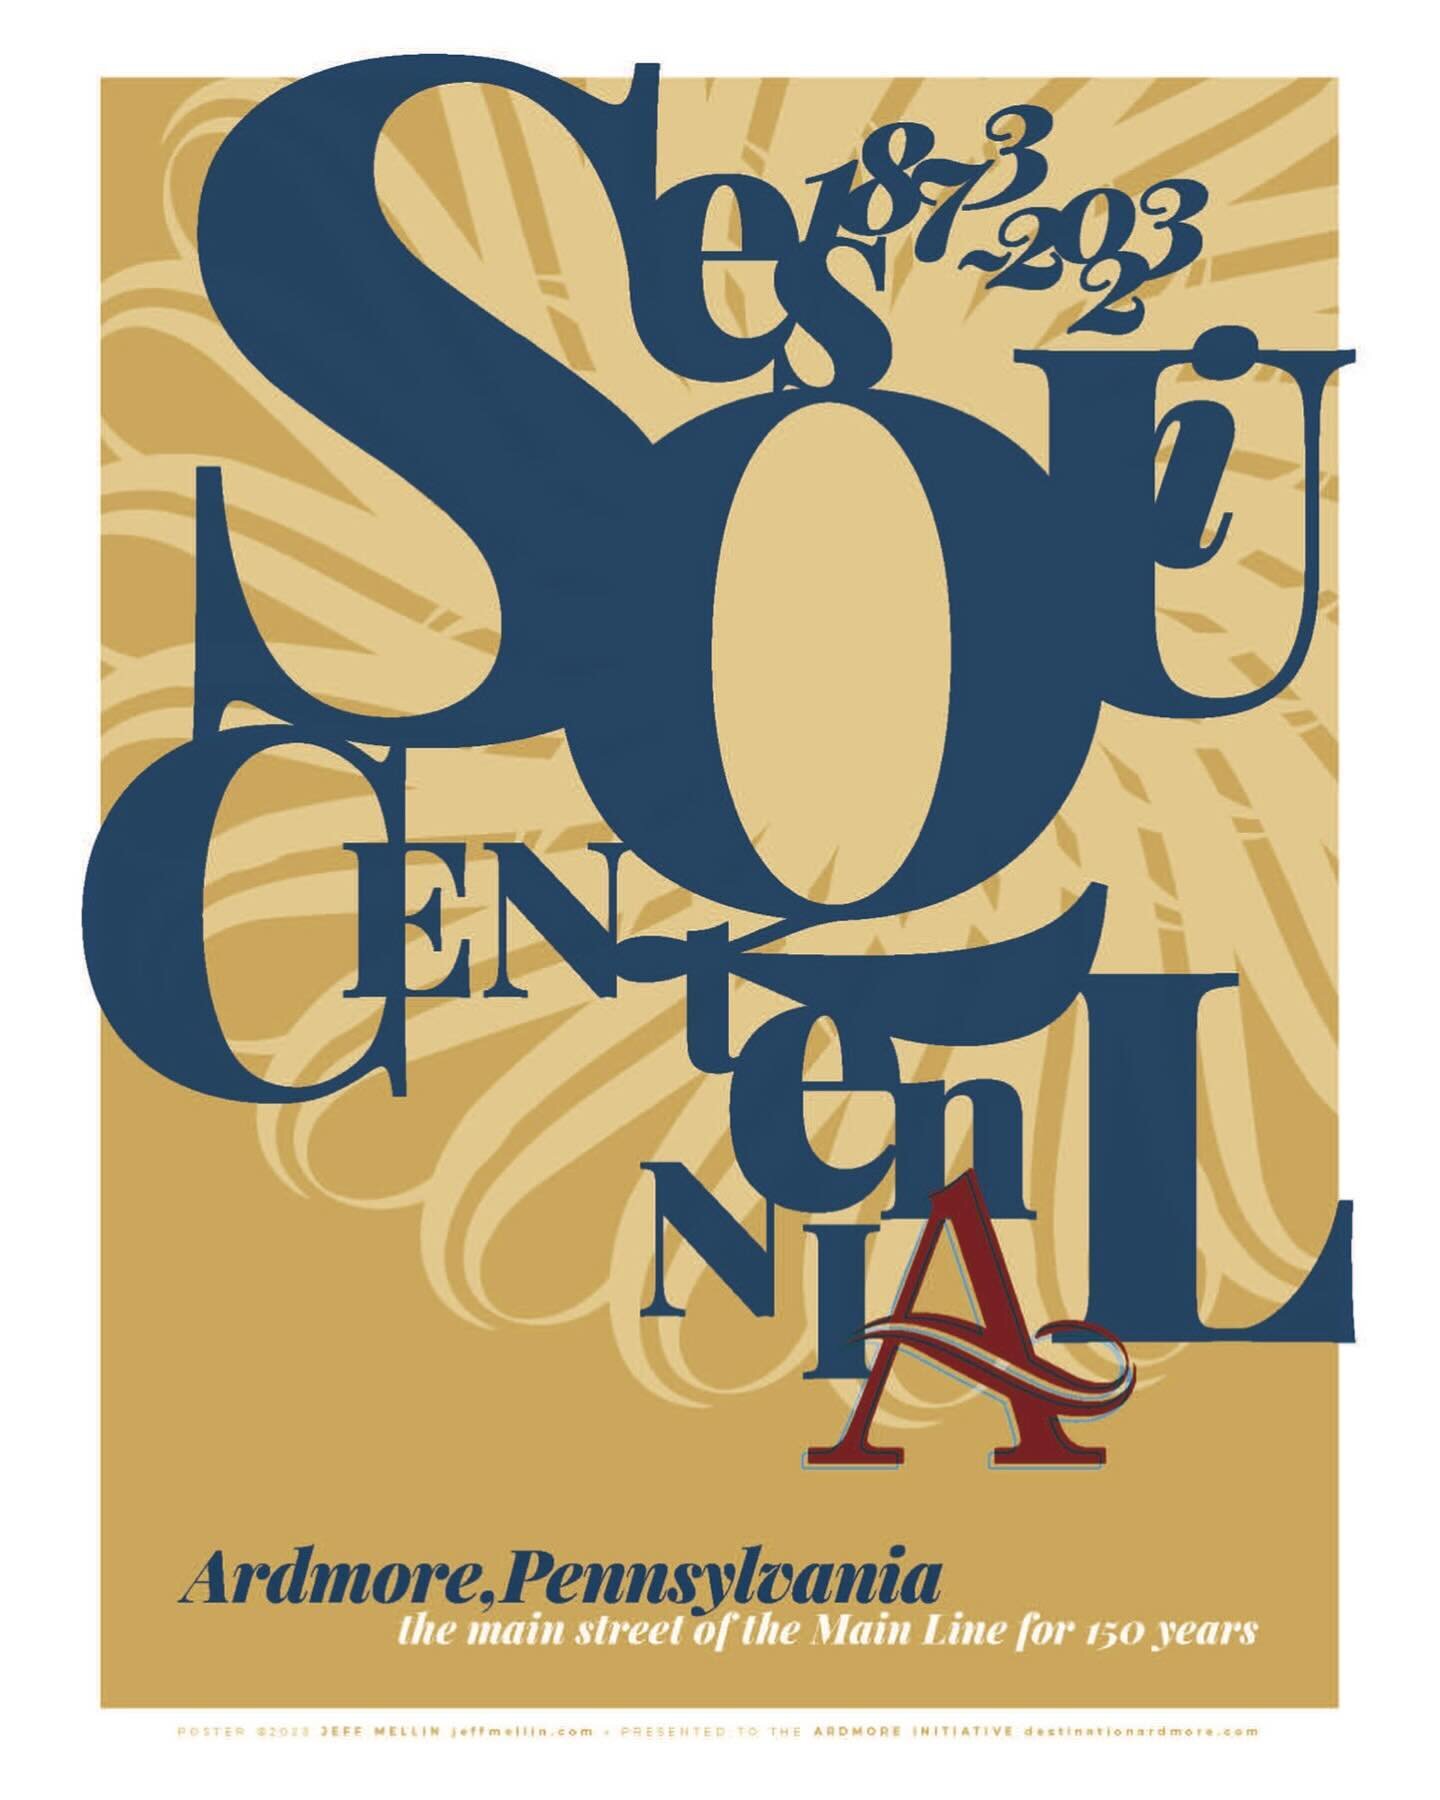 Sesquicentennial Tetraptych (image 3 of 4), digital print on paper, 2023, LE of 23.
To close out #2023, I presented Lower Merion Township and the Ardmore Initiative&rsquo;s staff, board, and associates with a set of my four sesquicentennial #poster d